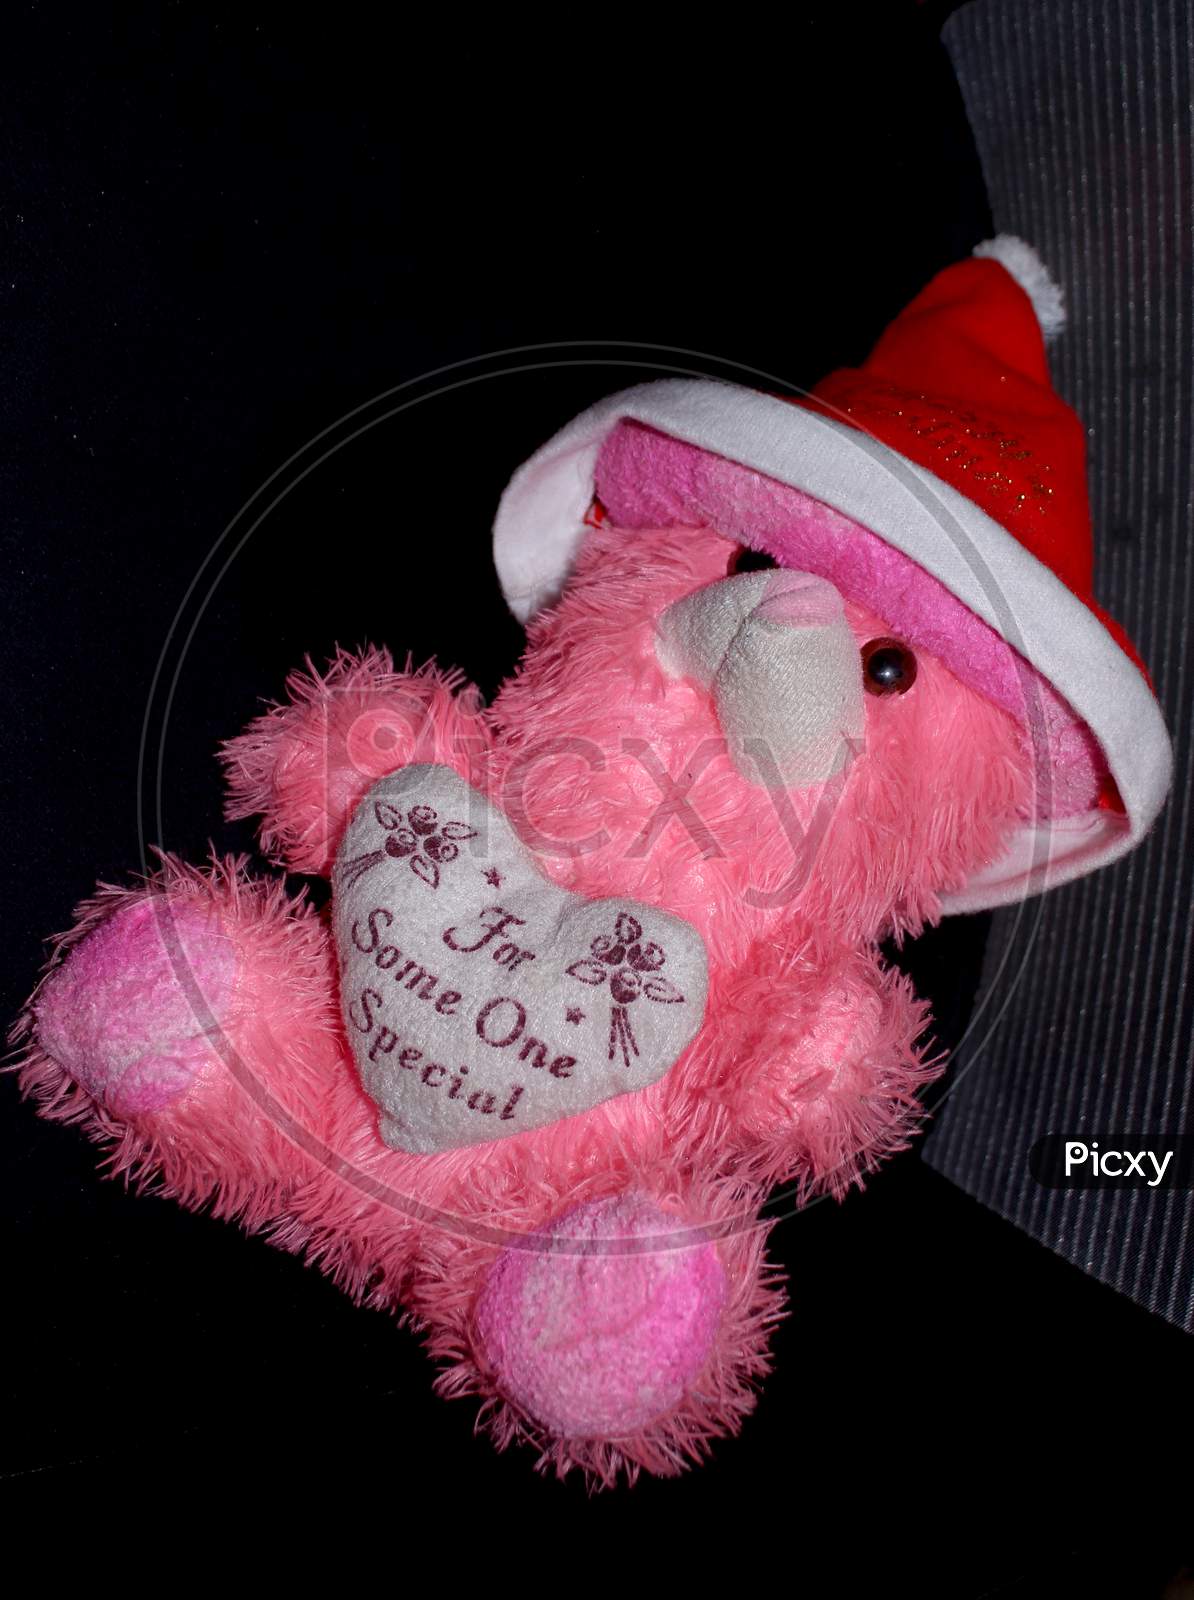 Pink Doll Or Toy On Black Background